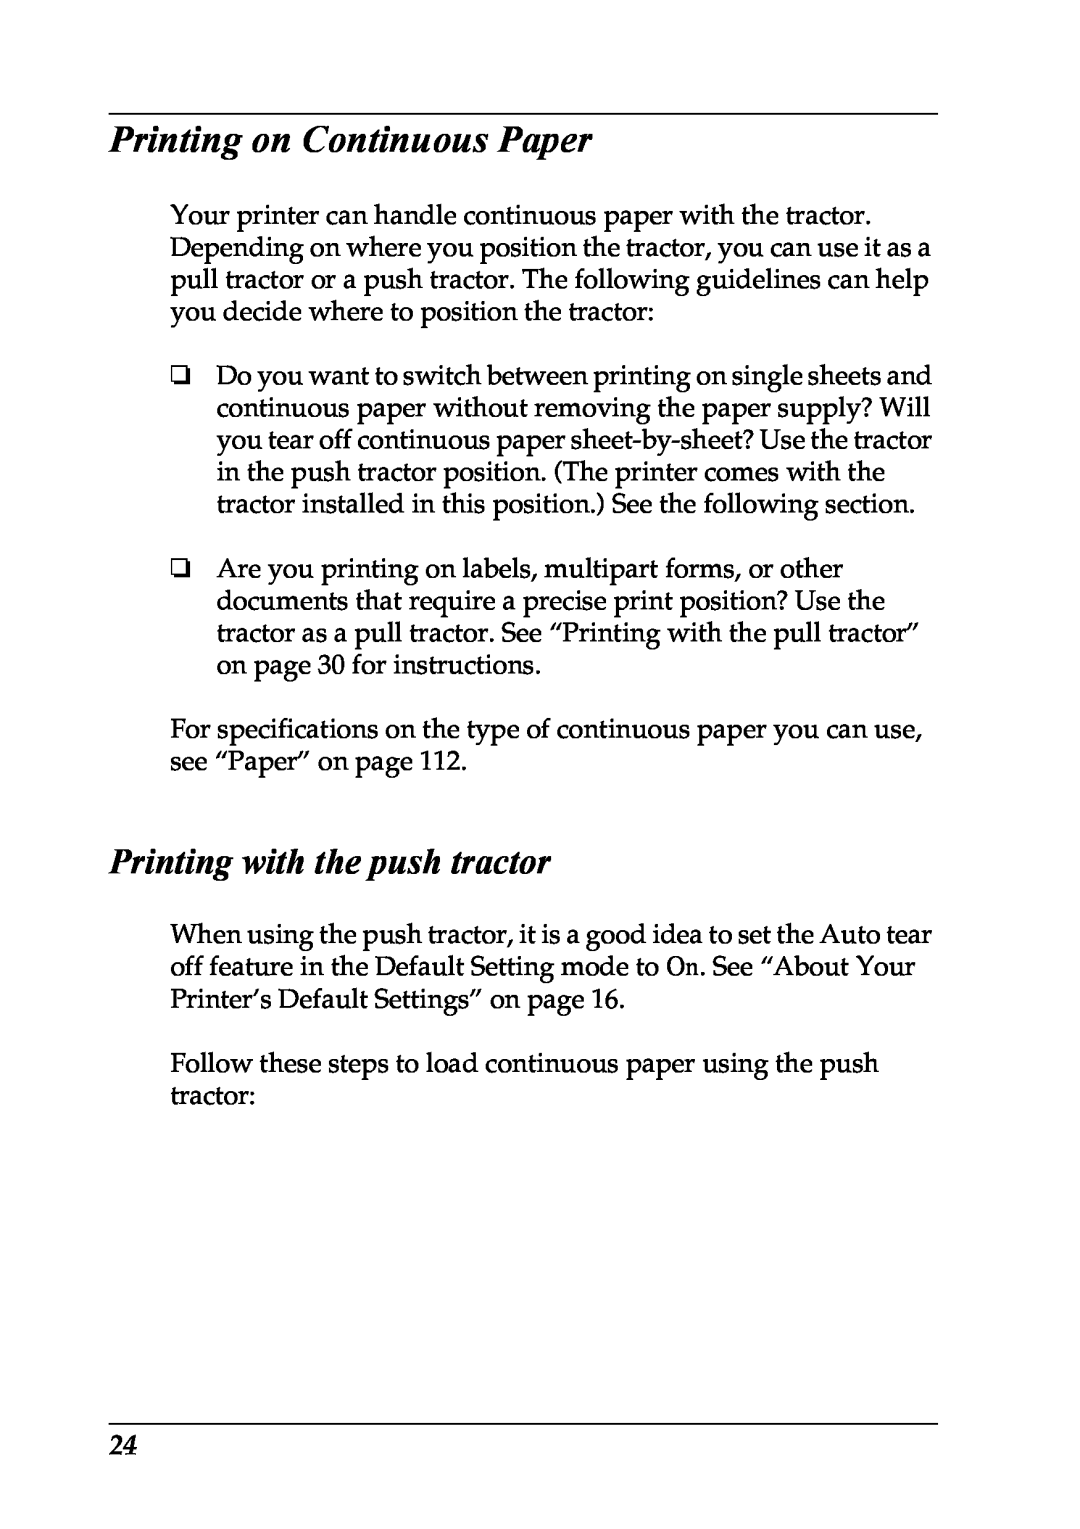 Epson LX-1170 manual Printing on Continuous Paper, Printing with the push tractor 